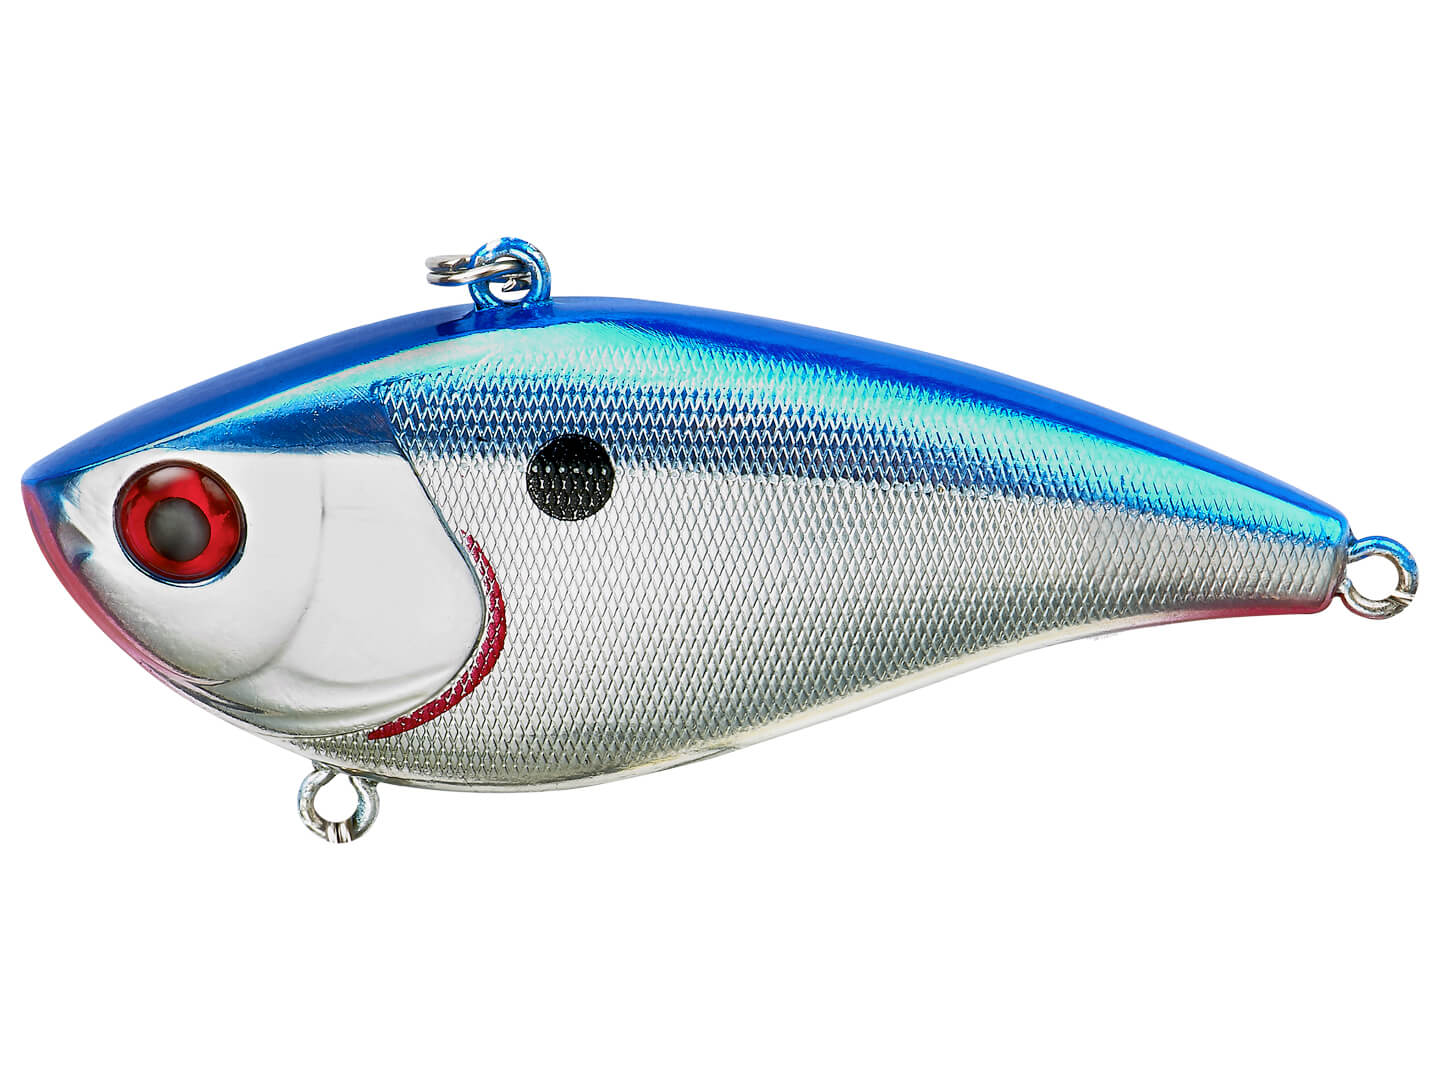 Booyah One Knocker Lipless Crankbait – Harpeth River Outfitters